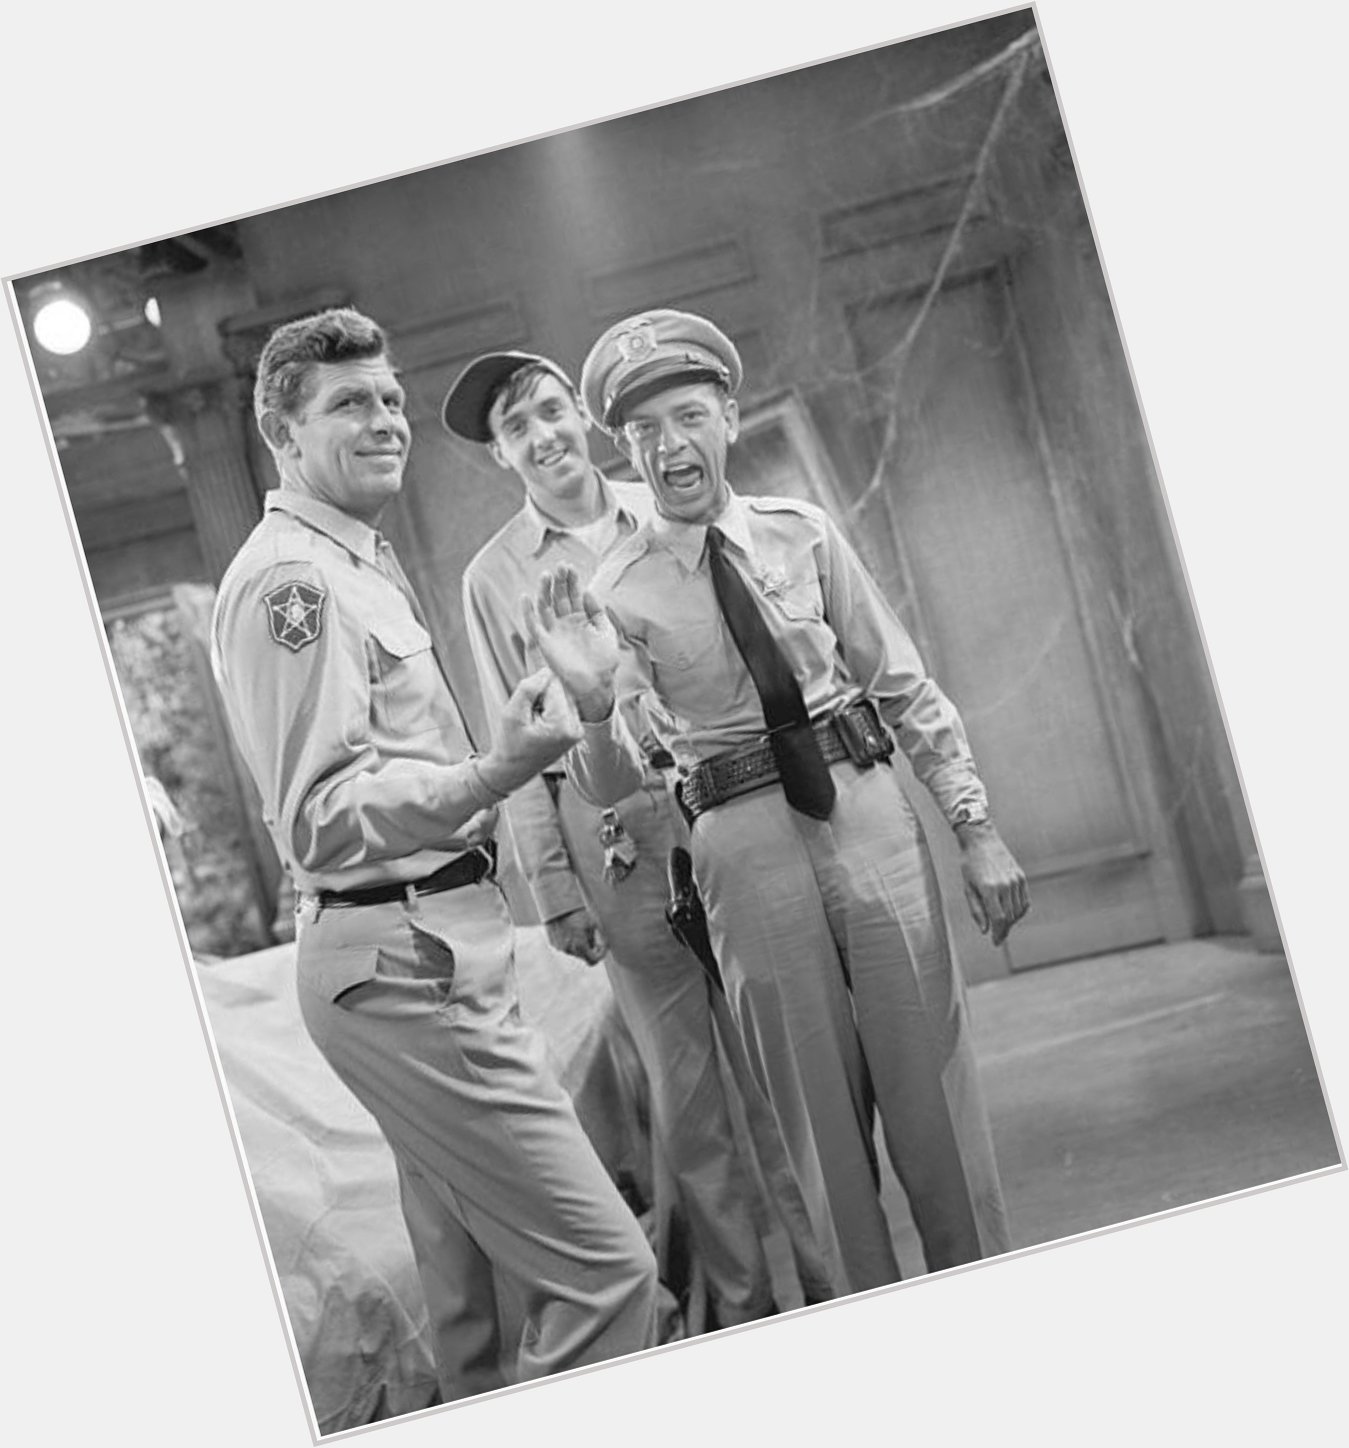 Happy birthday Andy Griffith.
Between scenes of The Andy Griffith Show, with Don Knotts & Jim Nabors
CBS, 1963 